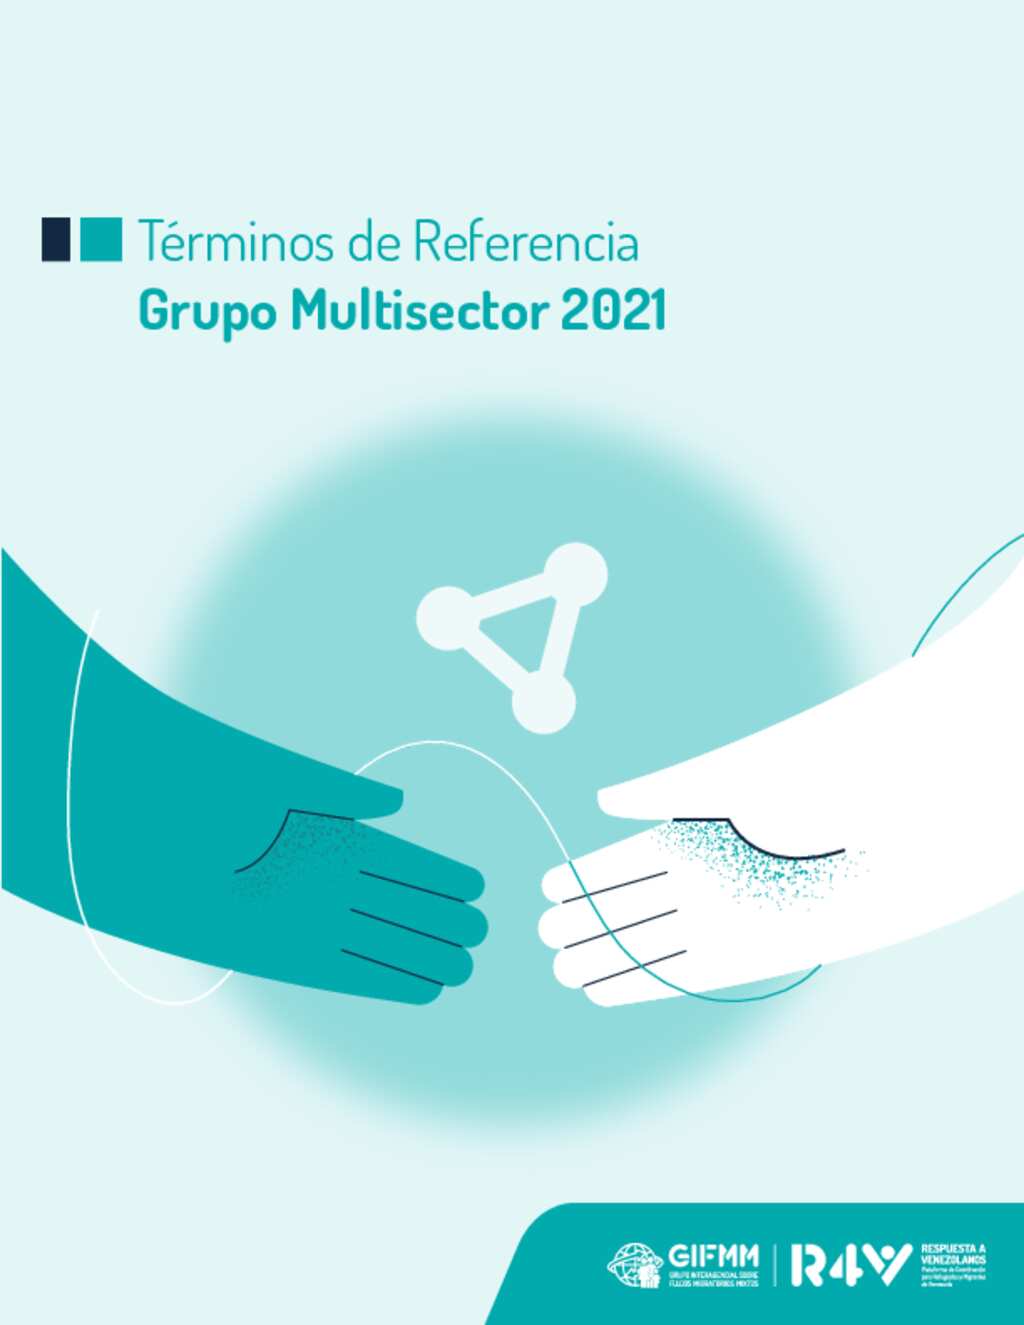 Document - GIFMM Colombia: Grupo Multisector - Términos de referencia 2021